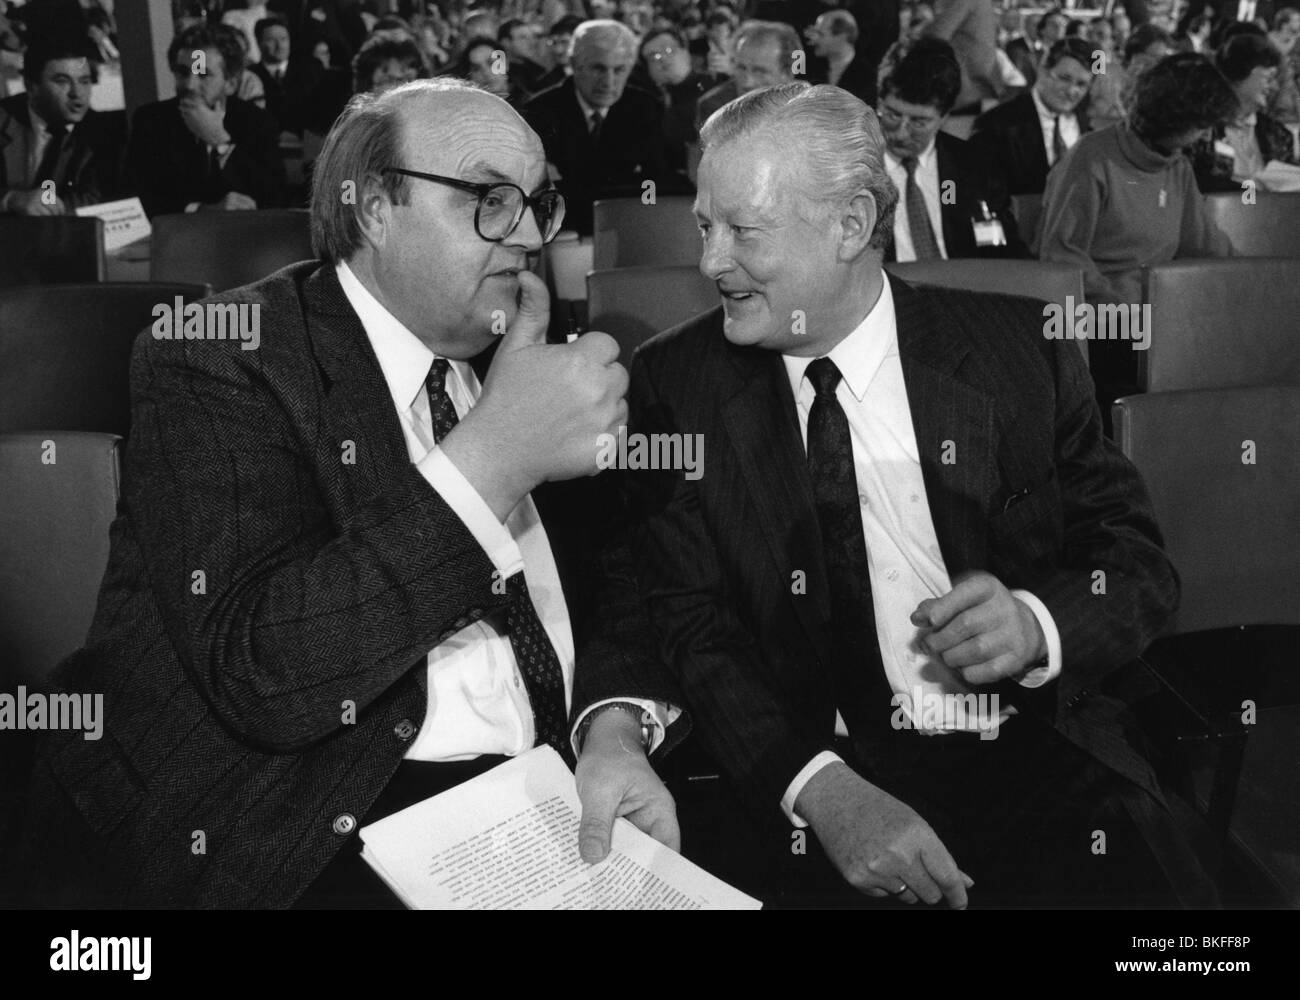 Streibl, Max, 6.1.1932 - 11.12.1998, German politician (CSU), Prime Minister of Bavaria 19.10.1988 - 27.5.1993, with chief editor of 'Bayernkurier' Wilfried Scharnagl, CSU party meeting, Munich, 22./23.11.1991, Stock Photo